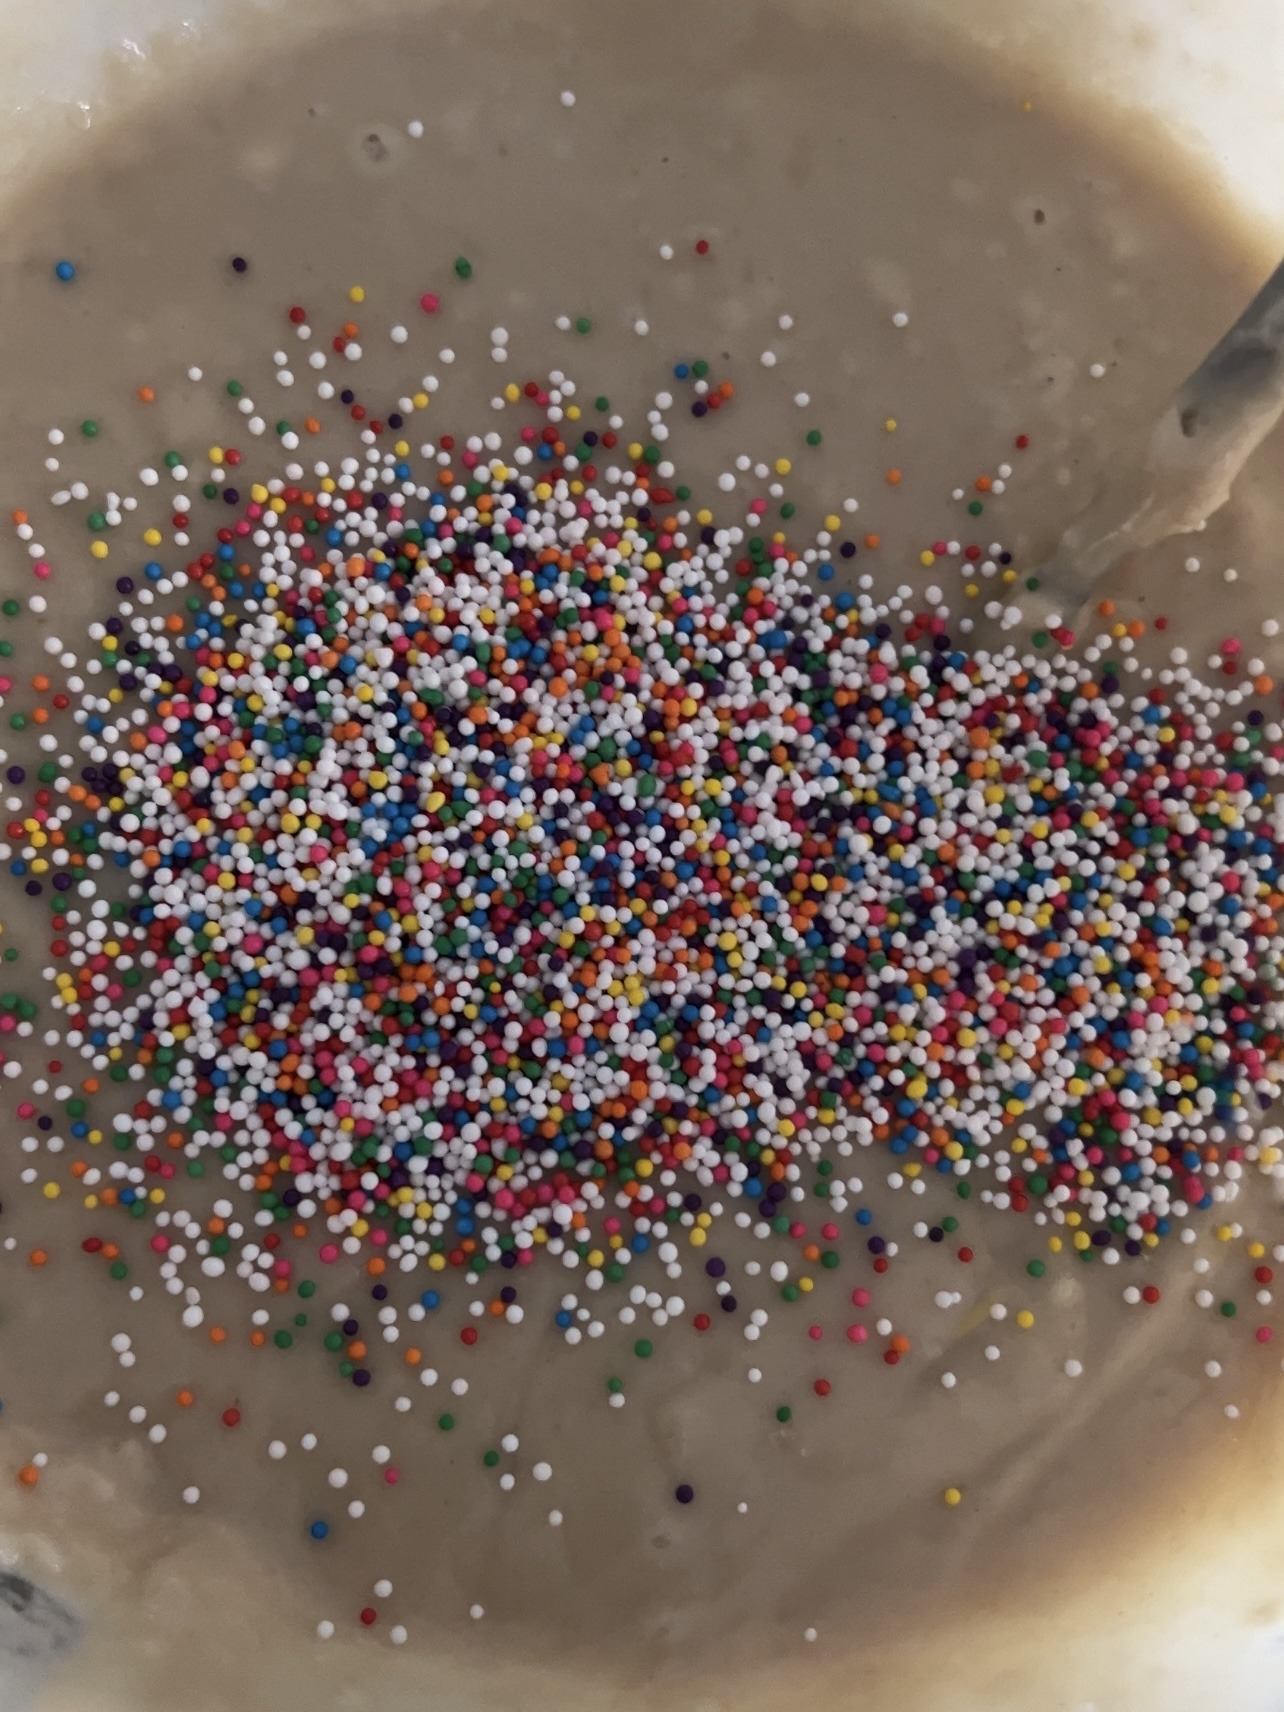 Adding rainbow sprinkles to cake batter in a large bowl.